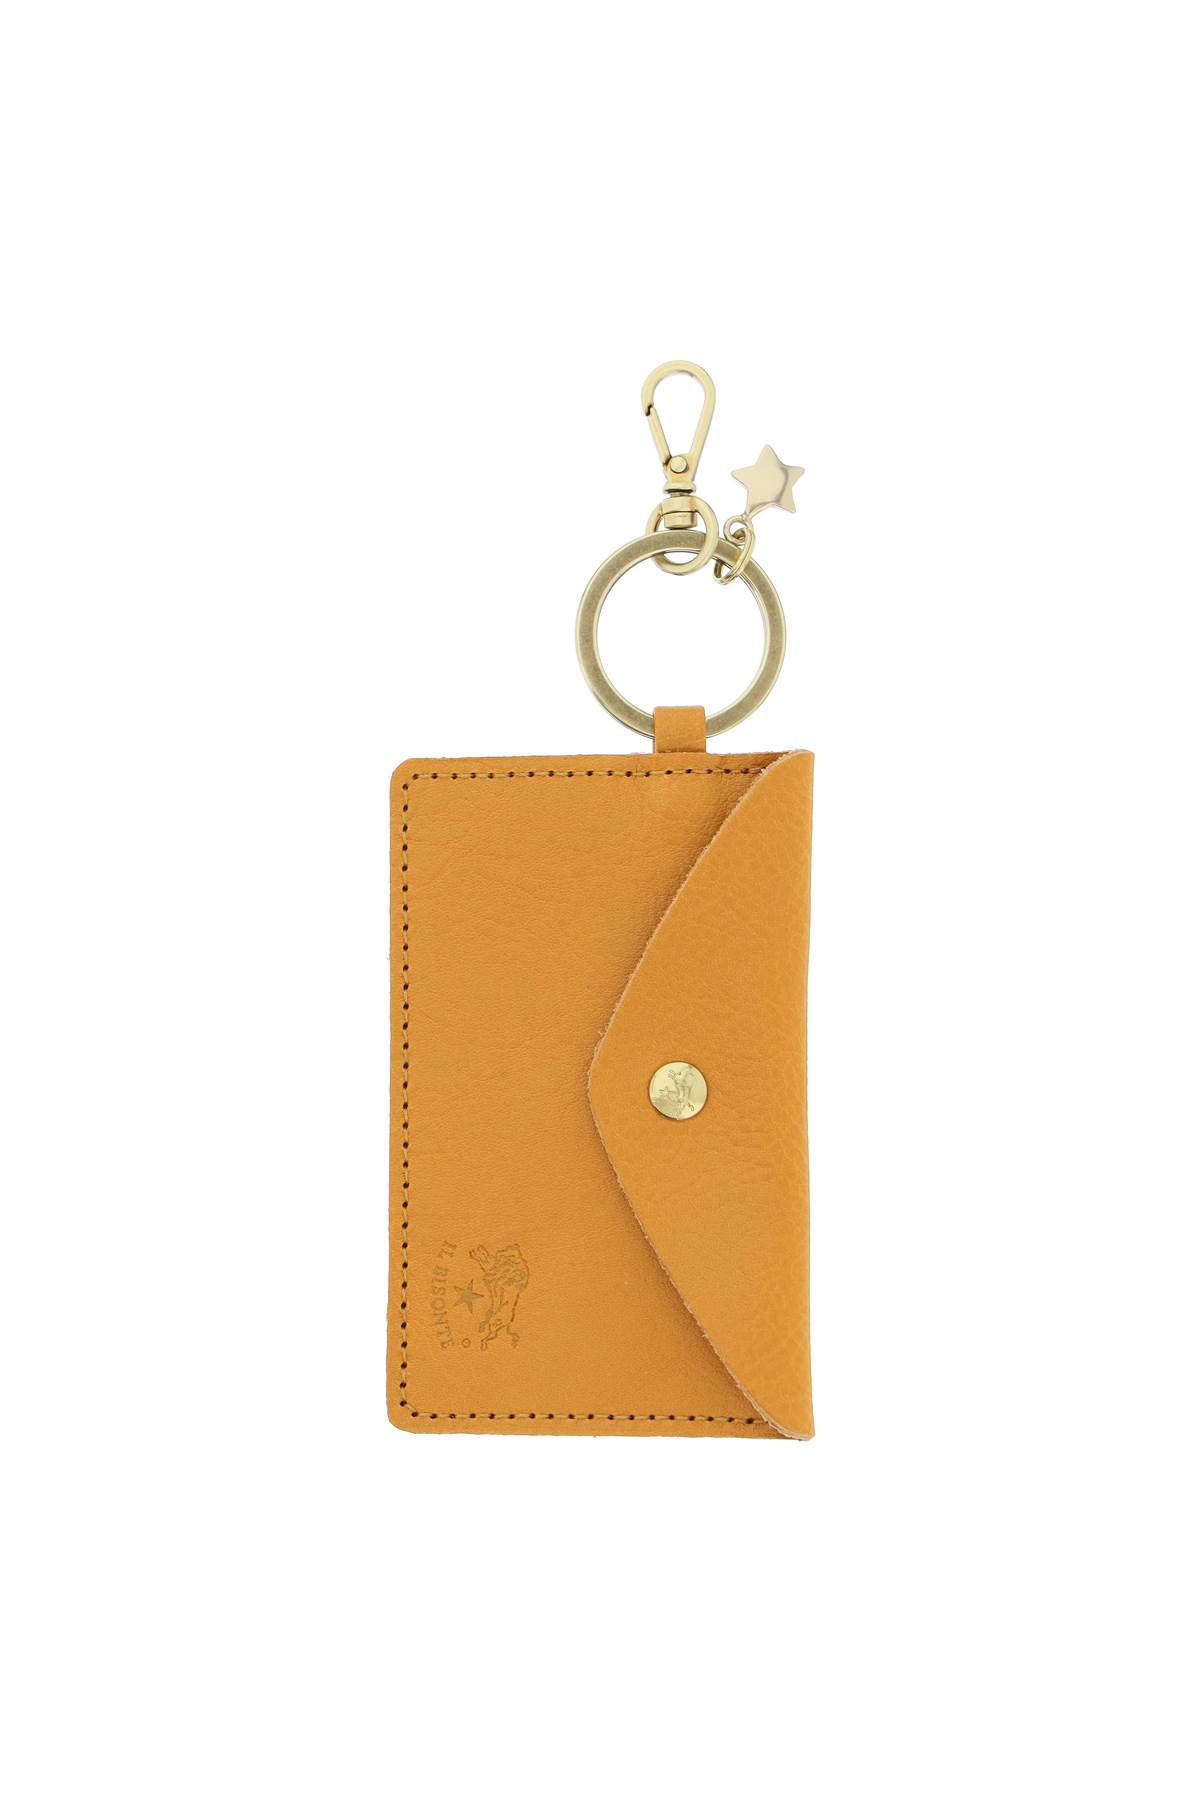 IL BISONTE KEY RING WITH CARDHOLDER